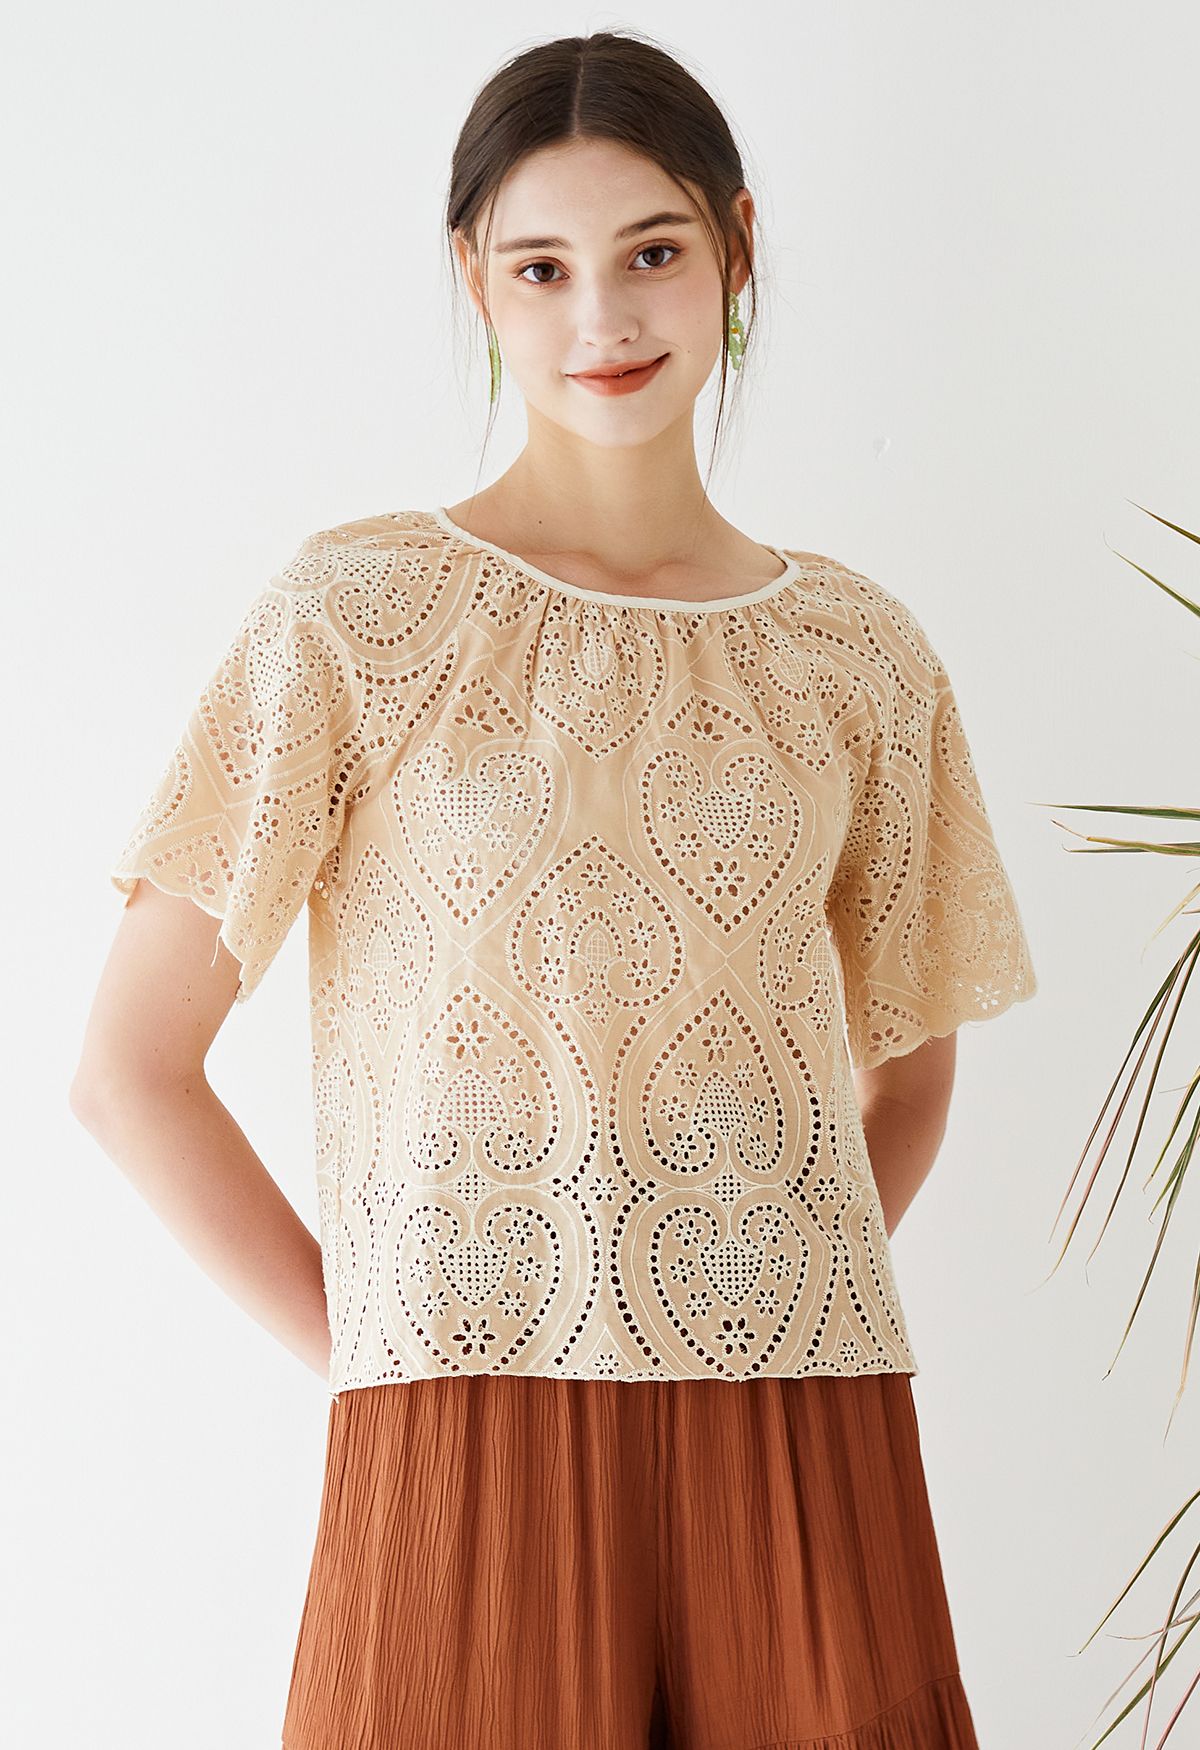 Beloved Heart Embroidered Eyelet Top in Apricot